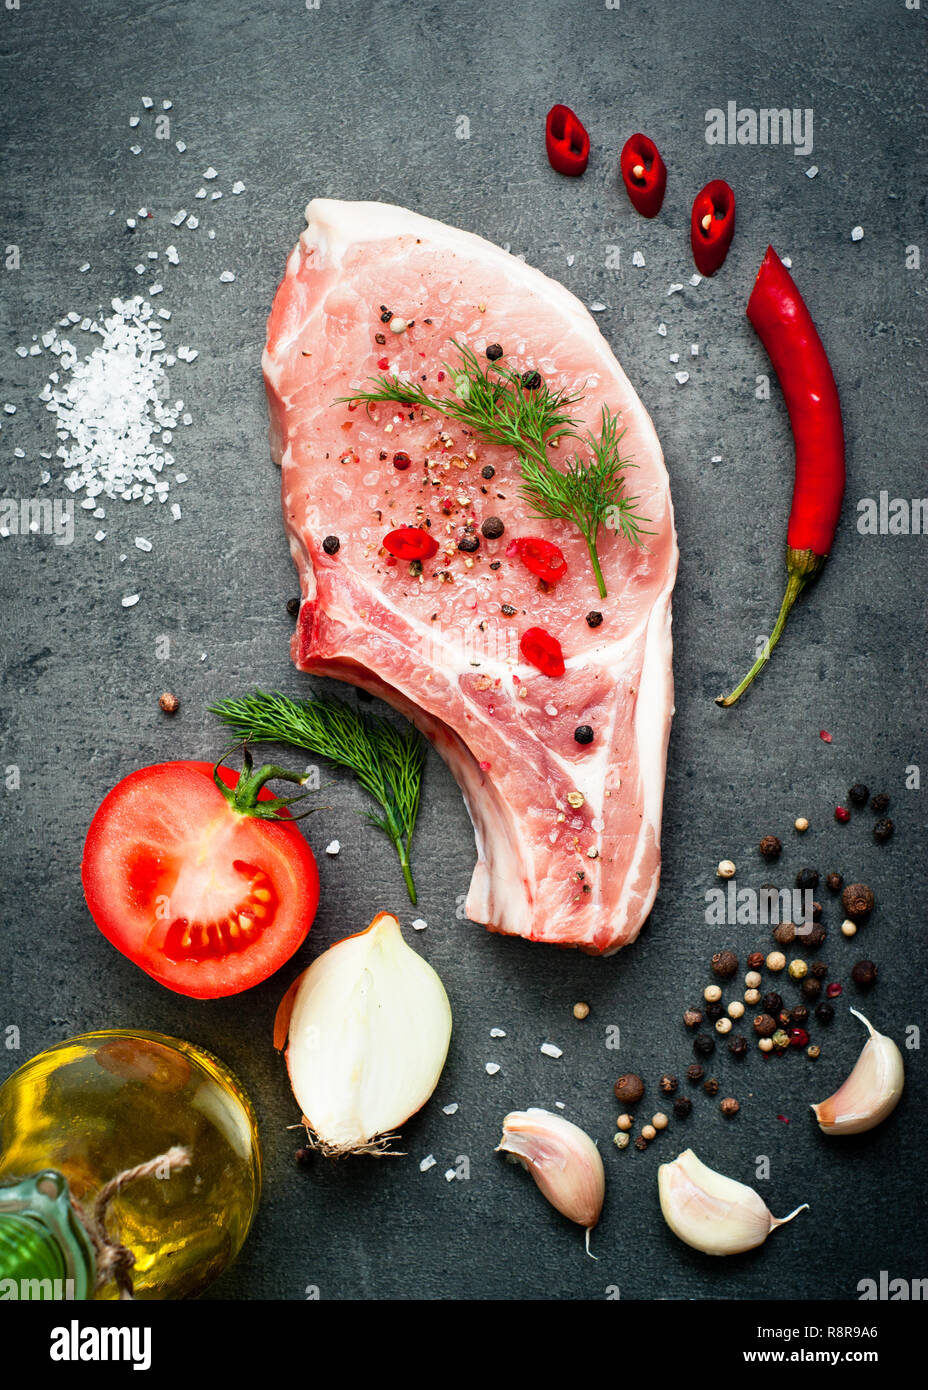 Raw pork meat on a dark gray surface and ingredients for cooking. Food background. Stock Photo